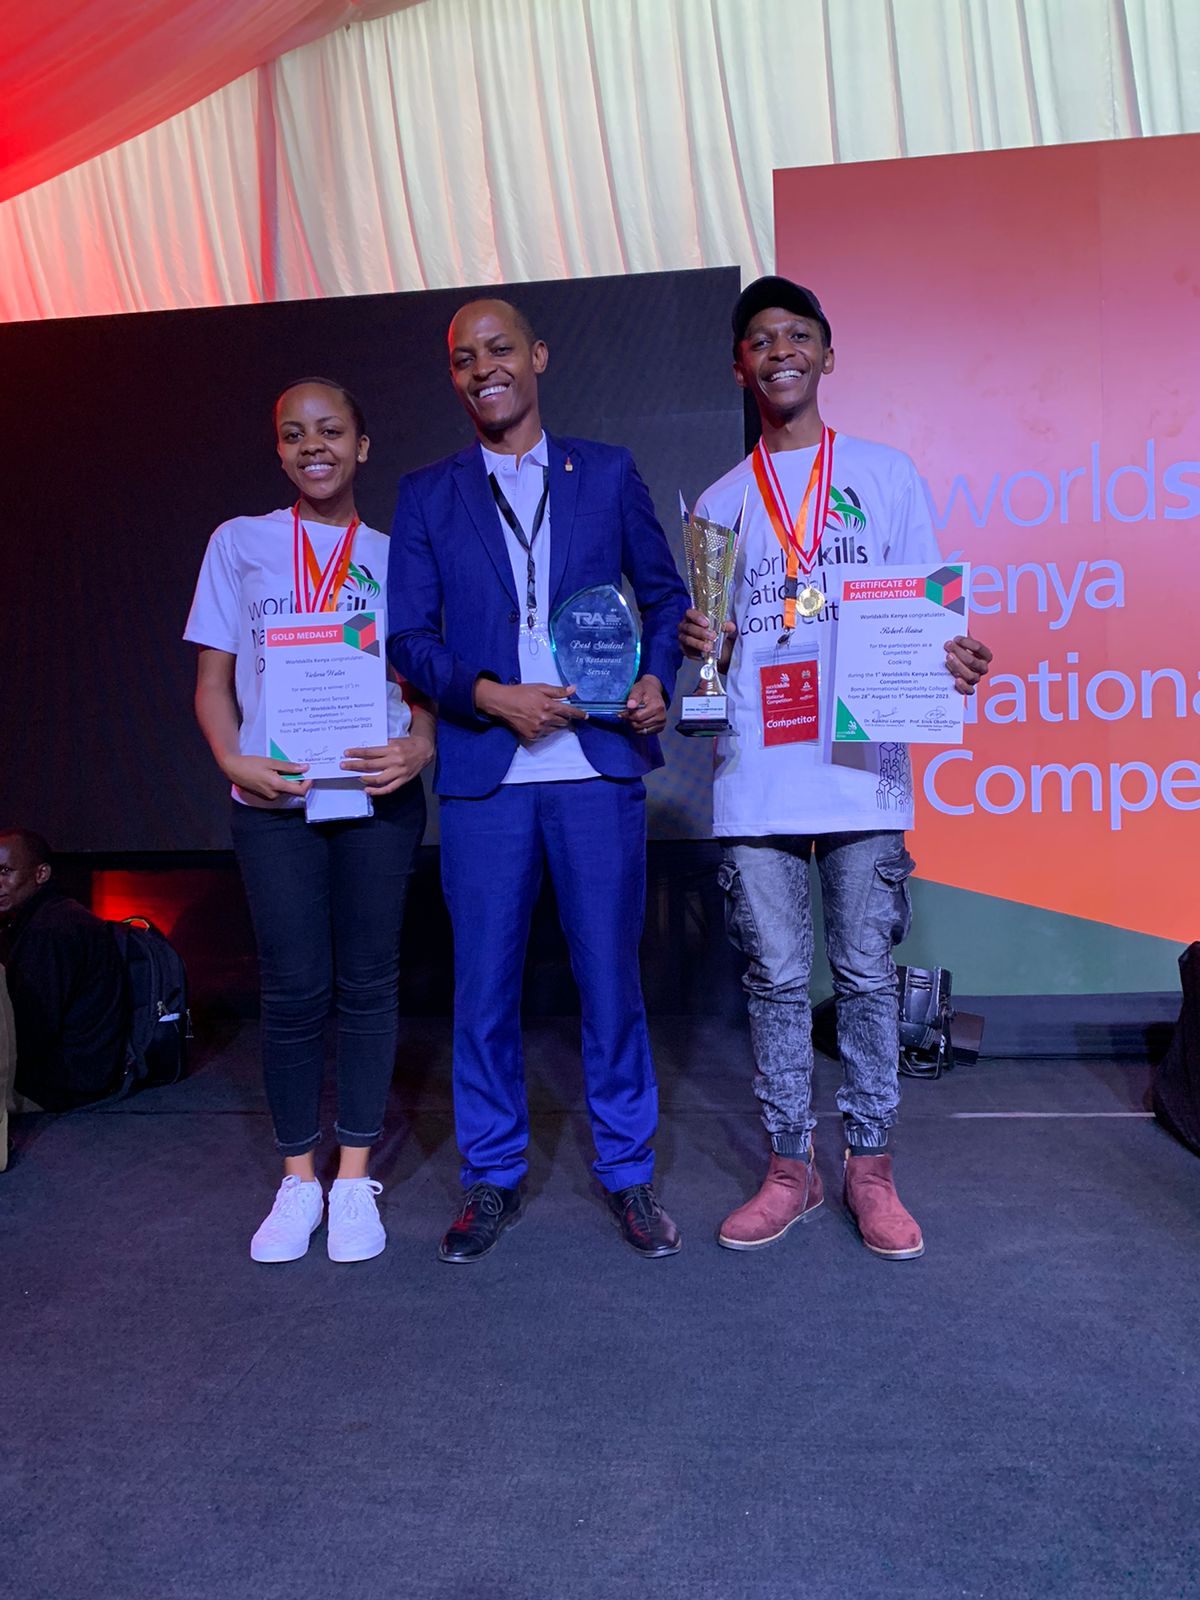 Boma College bags gold in both Culinary Arts & Restaurant Service at WorldSkills Kenya National Competition